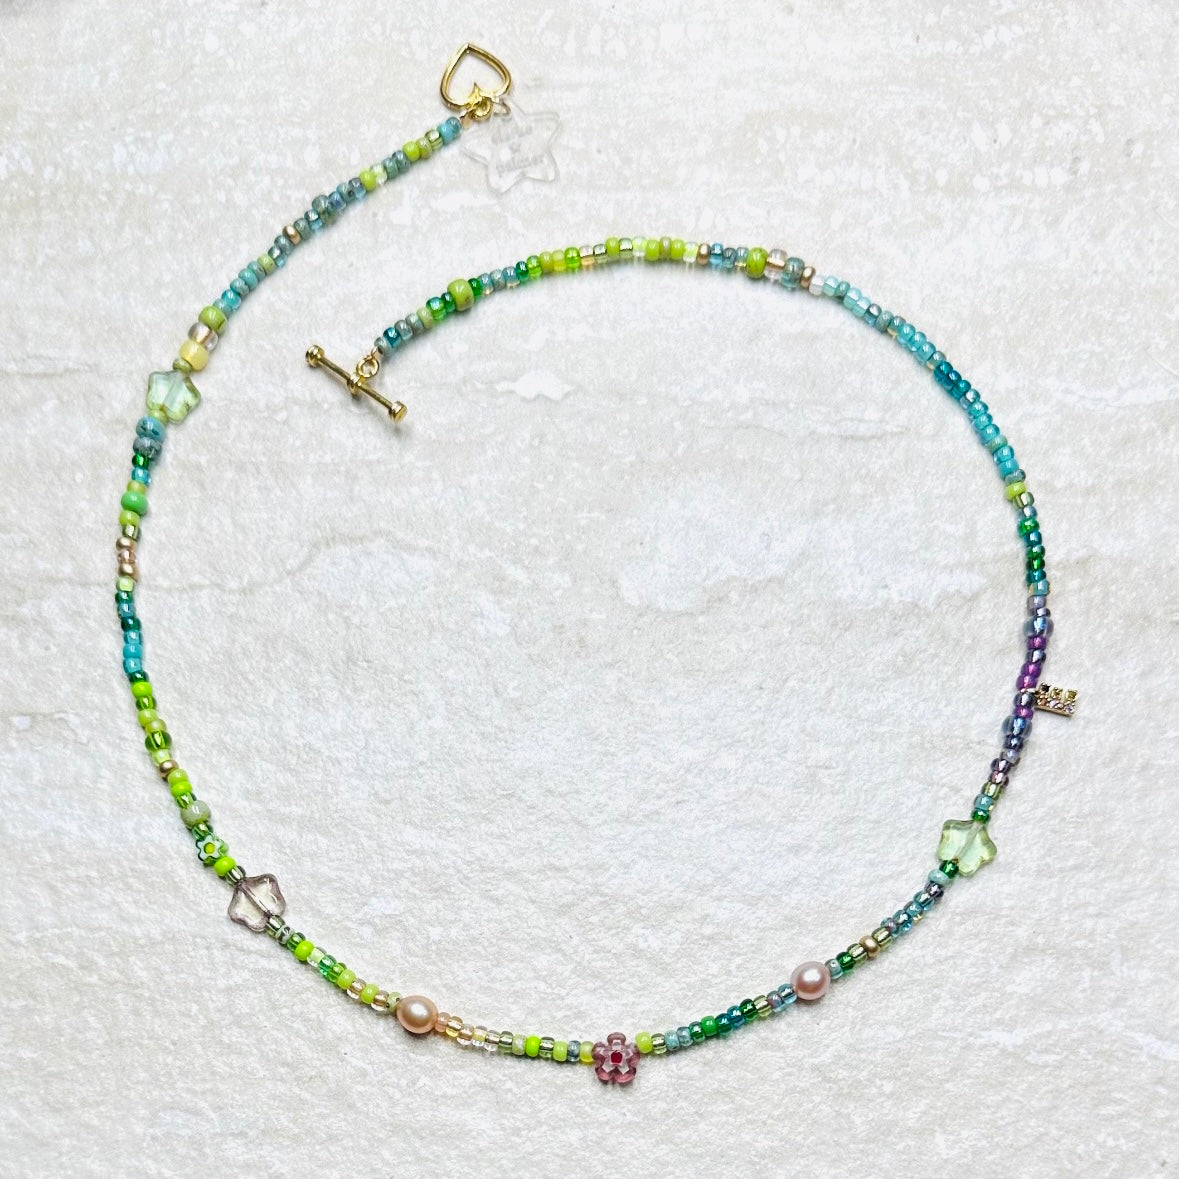 Dolly Mixture Beaded Necklace